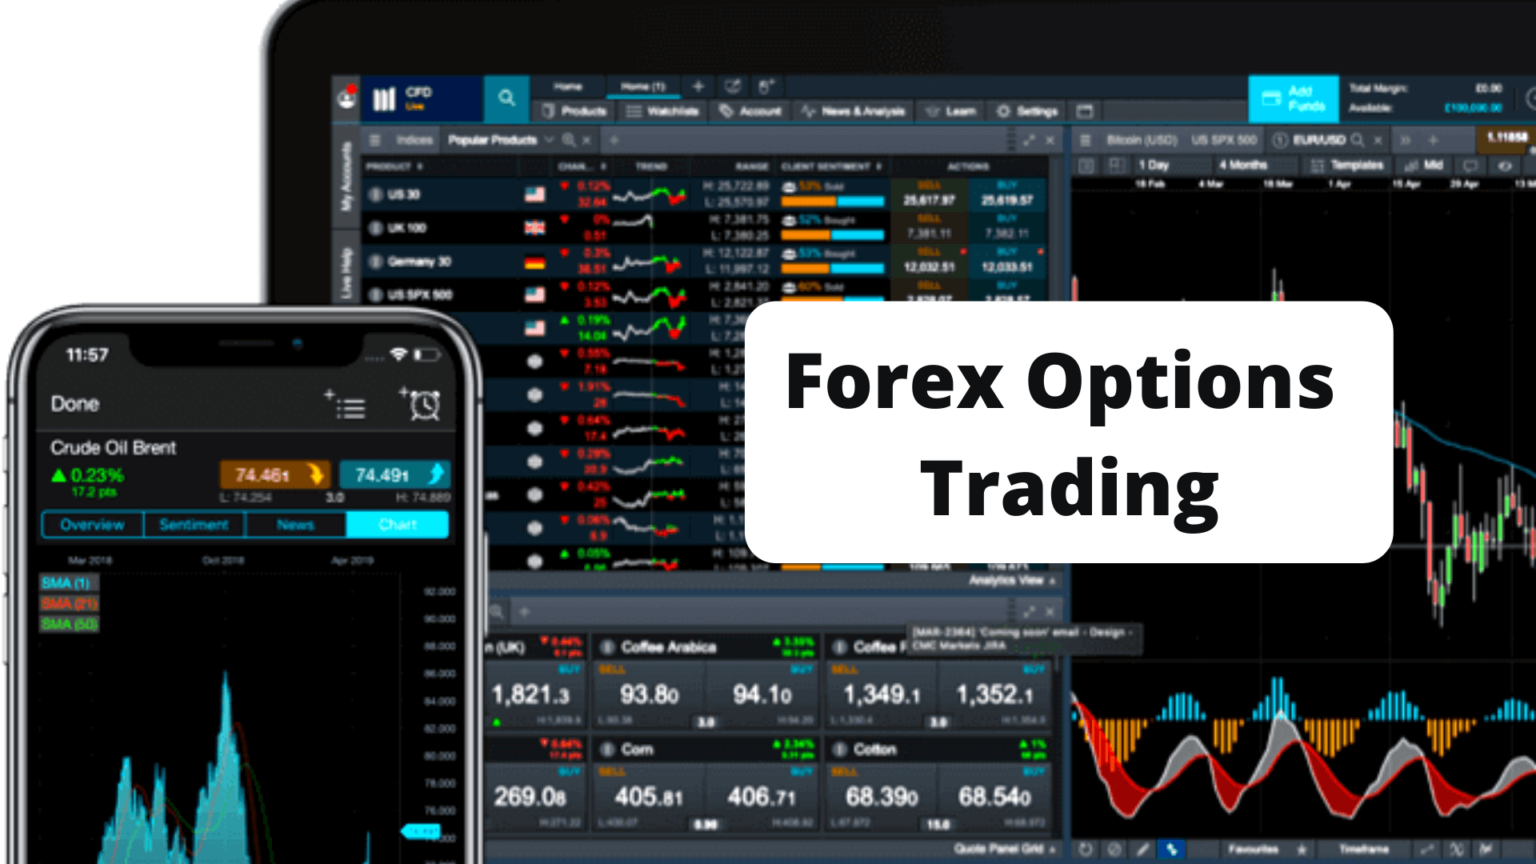 What Is Forex Options Trading